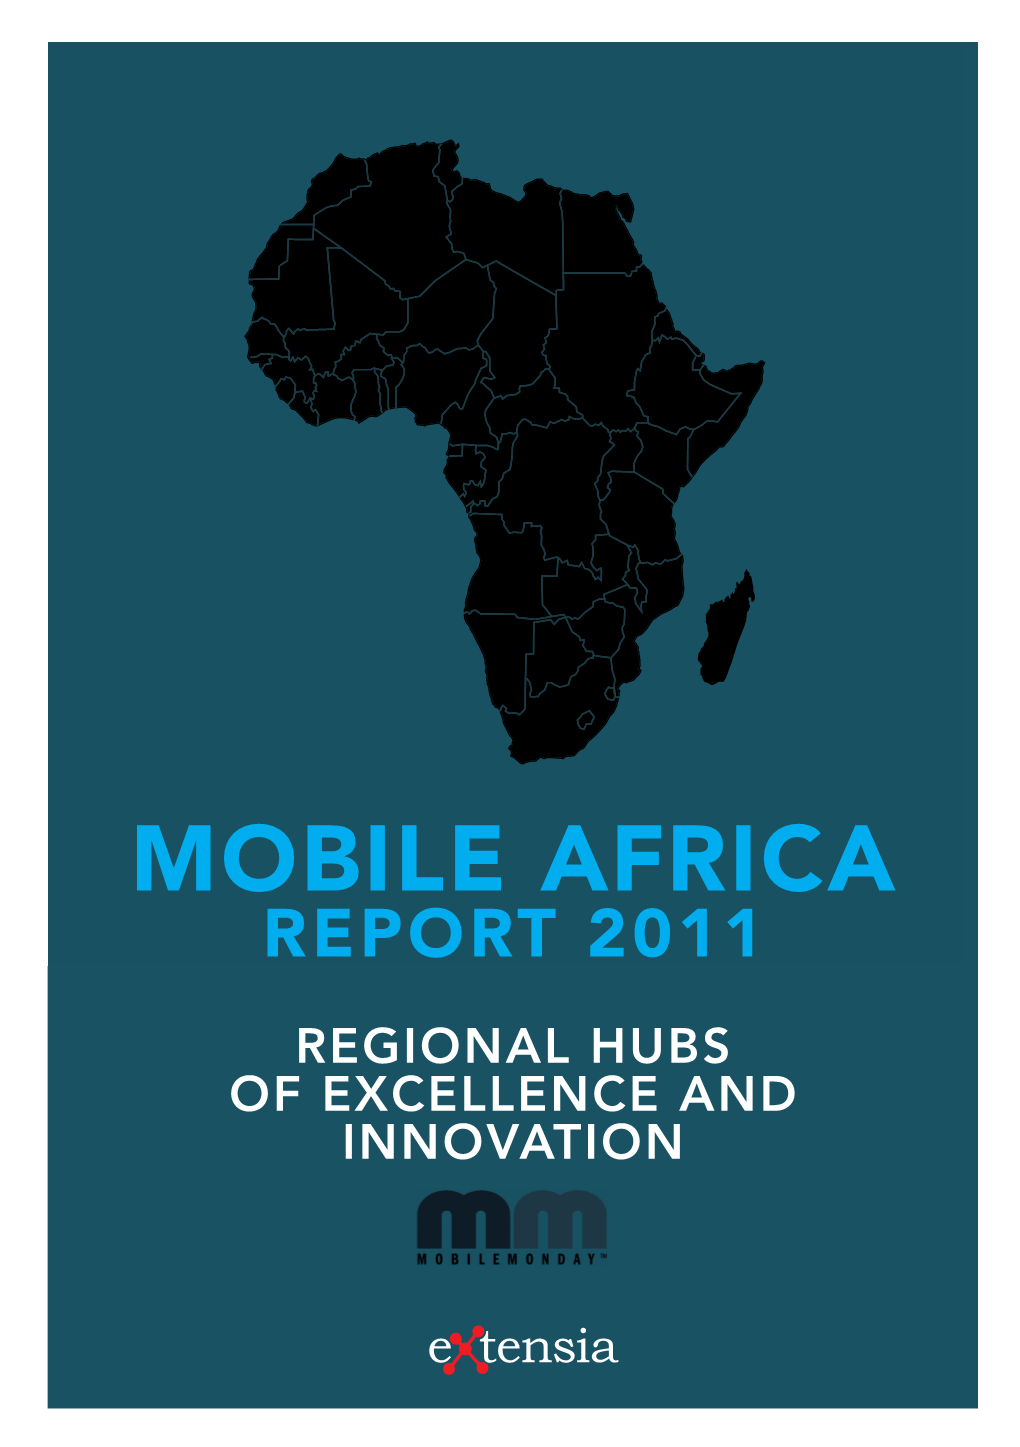 Mobile Africa Report 2011 Regional Hubs of Excellence and Innovation